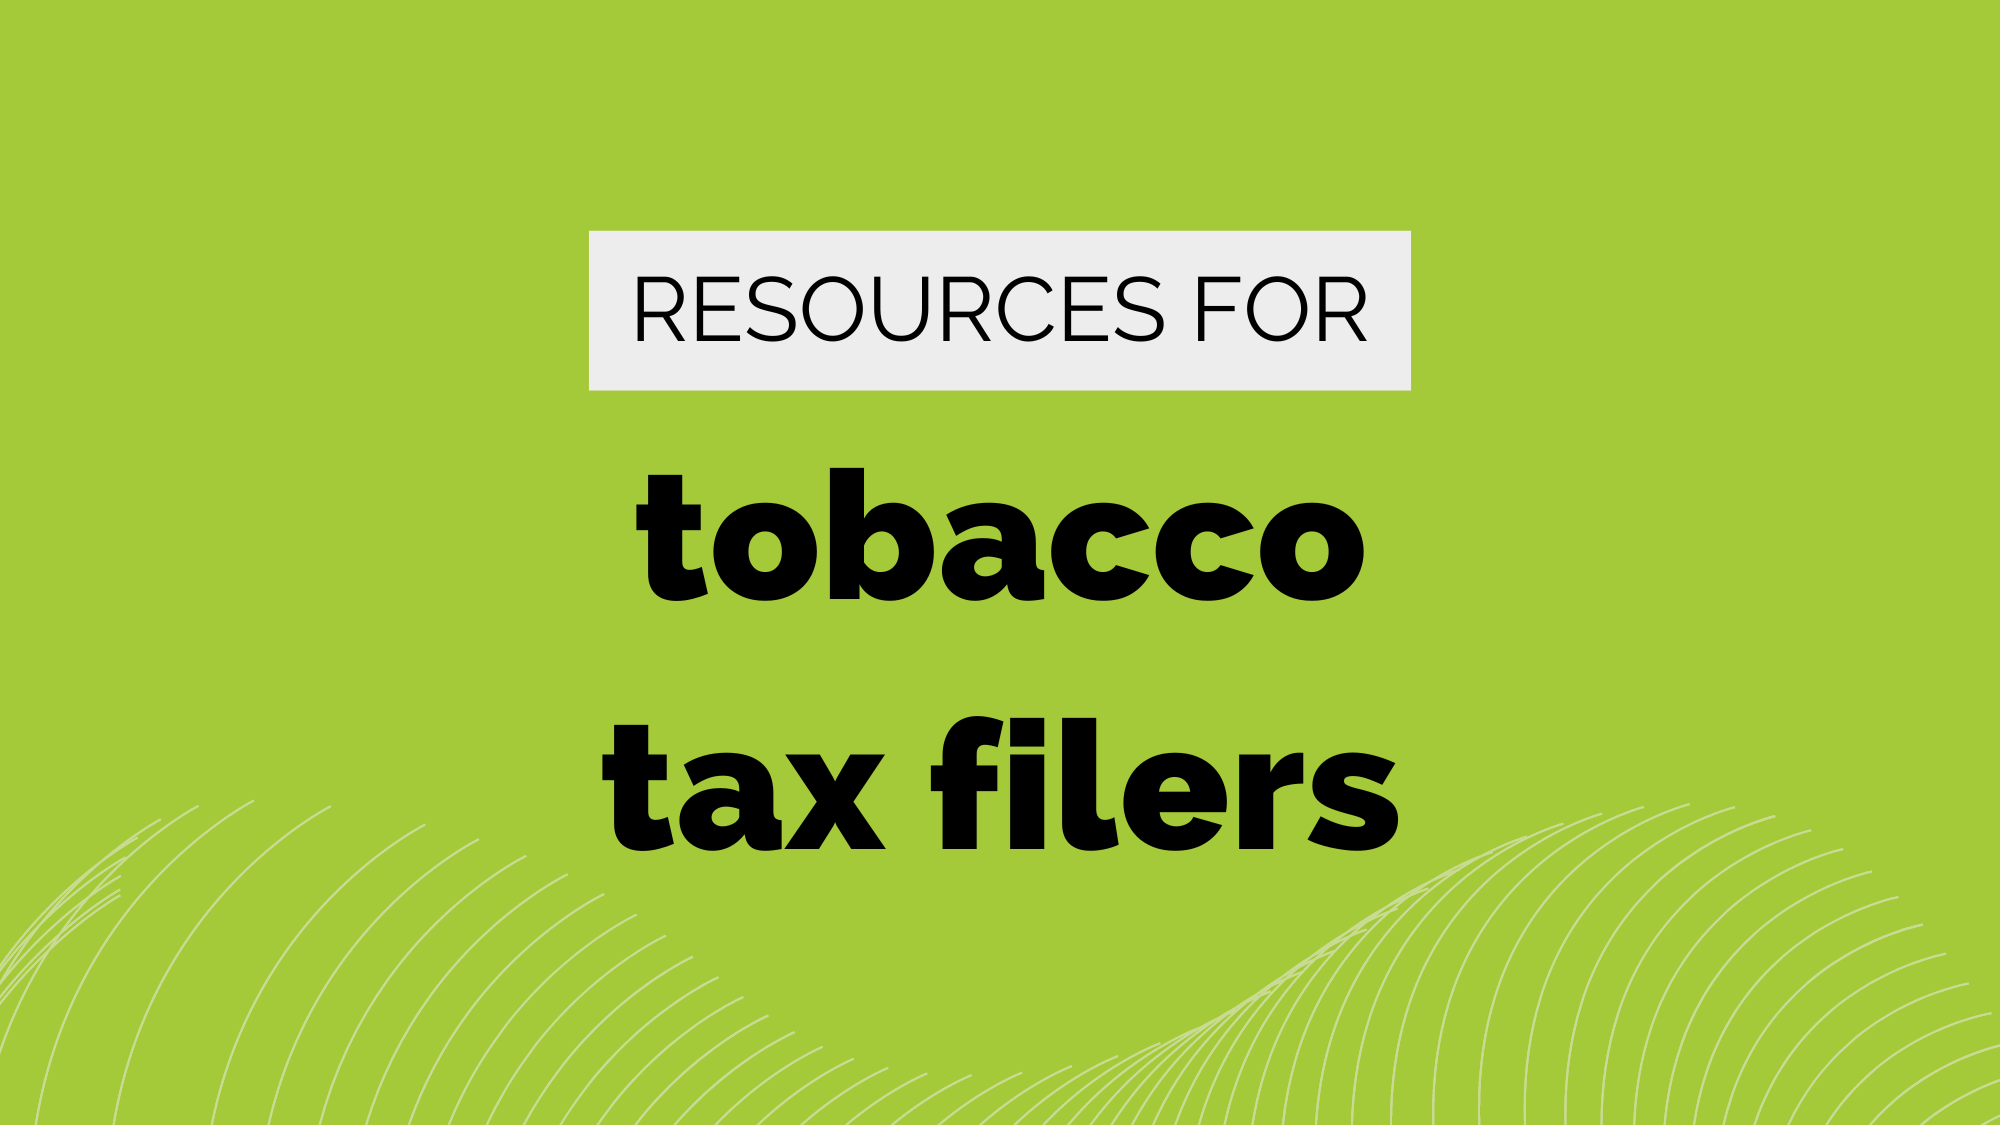 Resources for tobacco tax filers